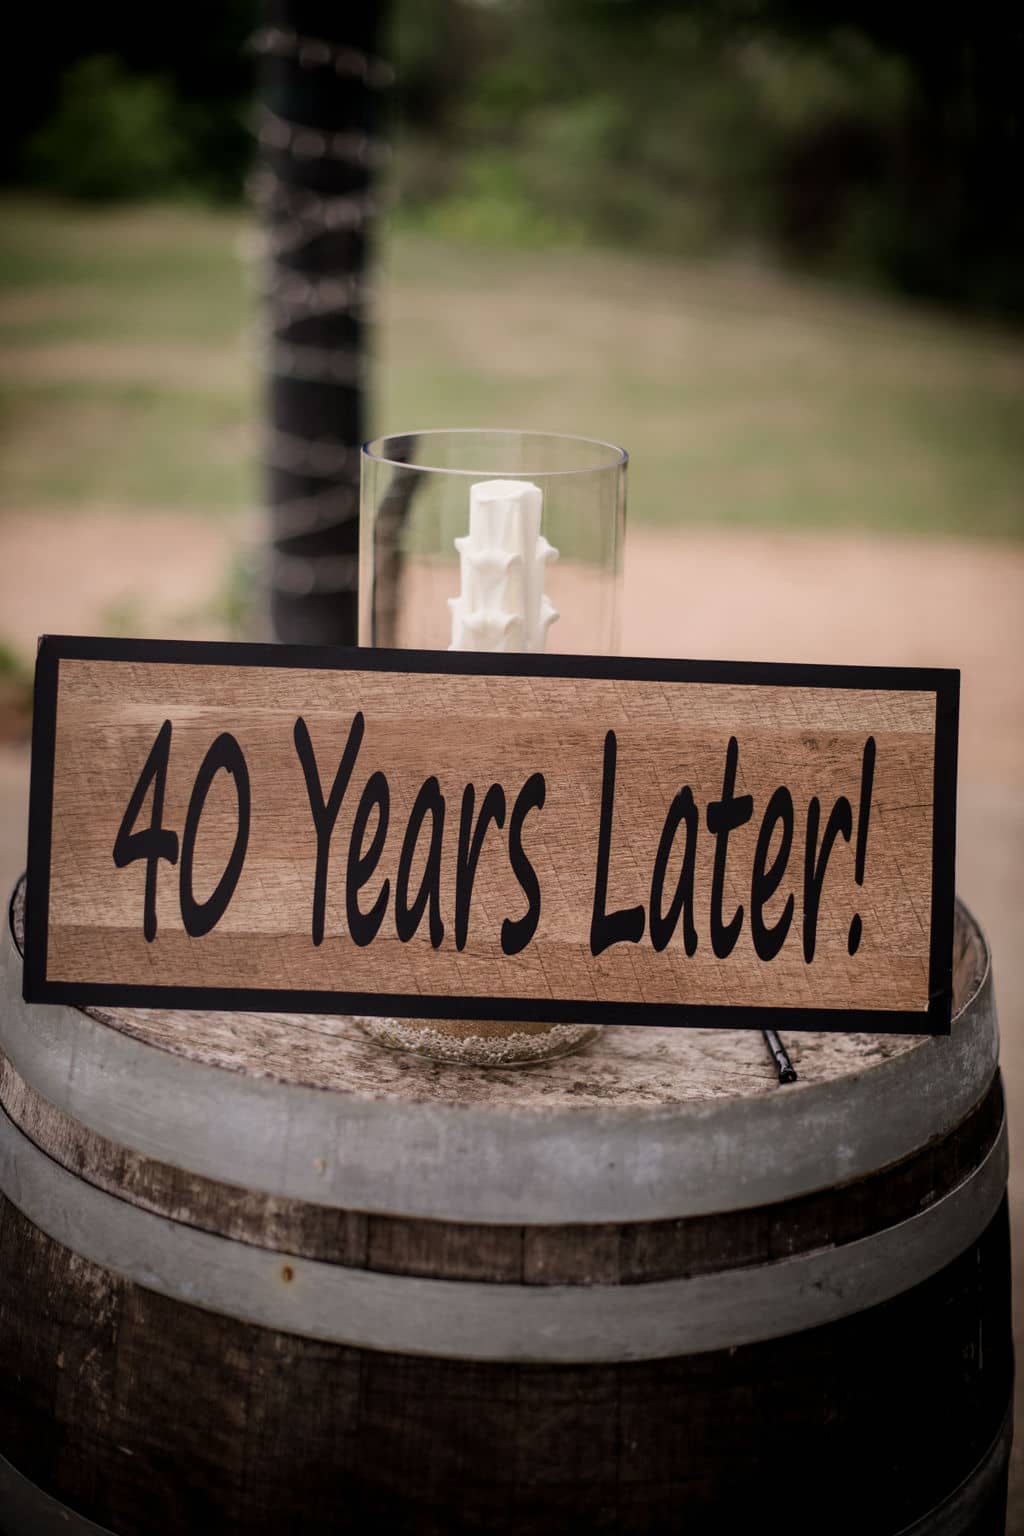 a sign depicting "40 years later!" for the couple's vow renewal